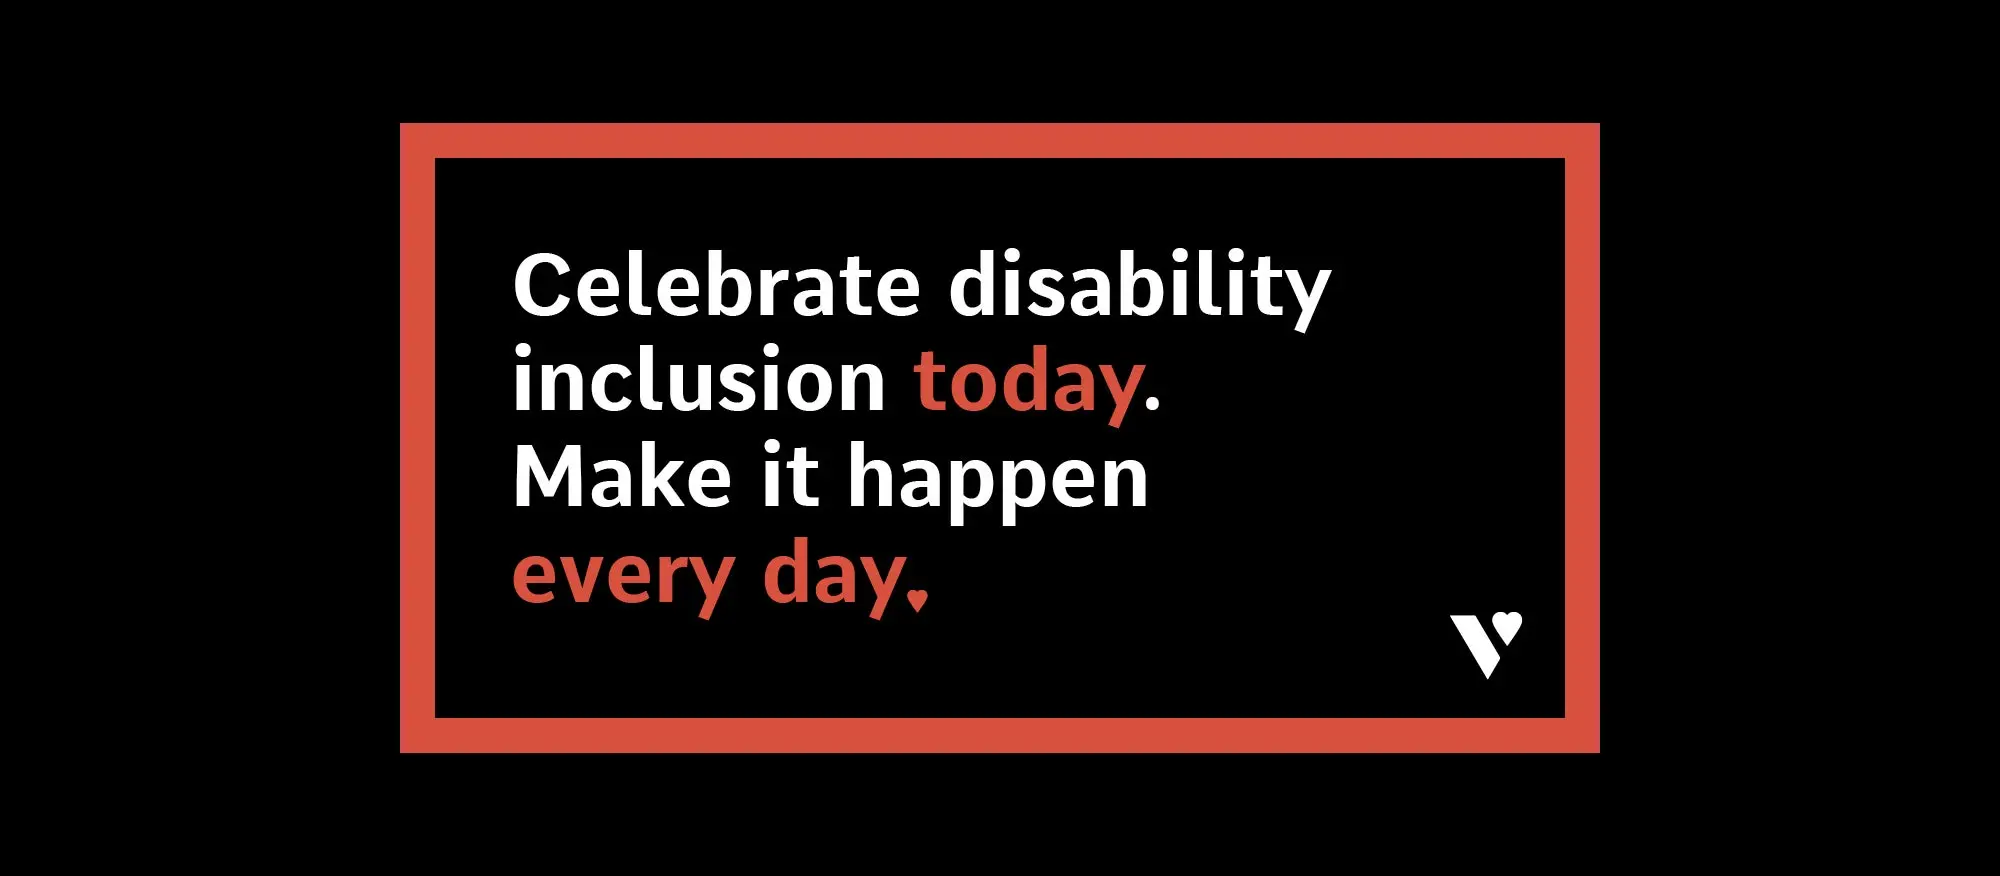 Celebrate disability inclusion today. Make it happen every day.